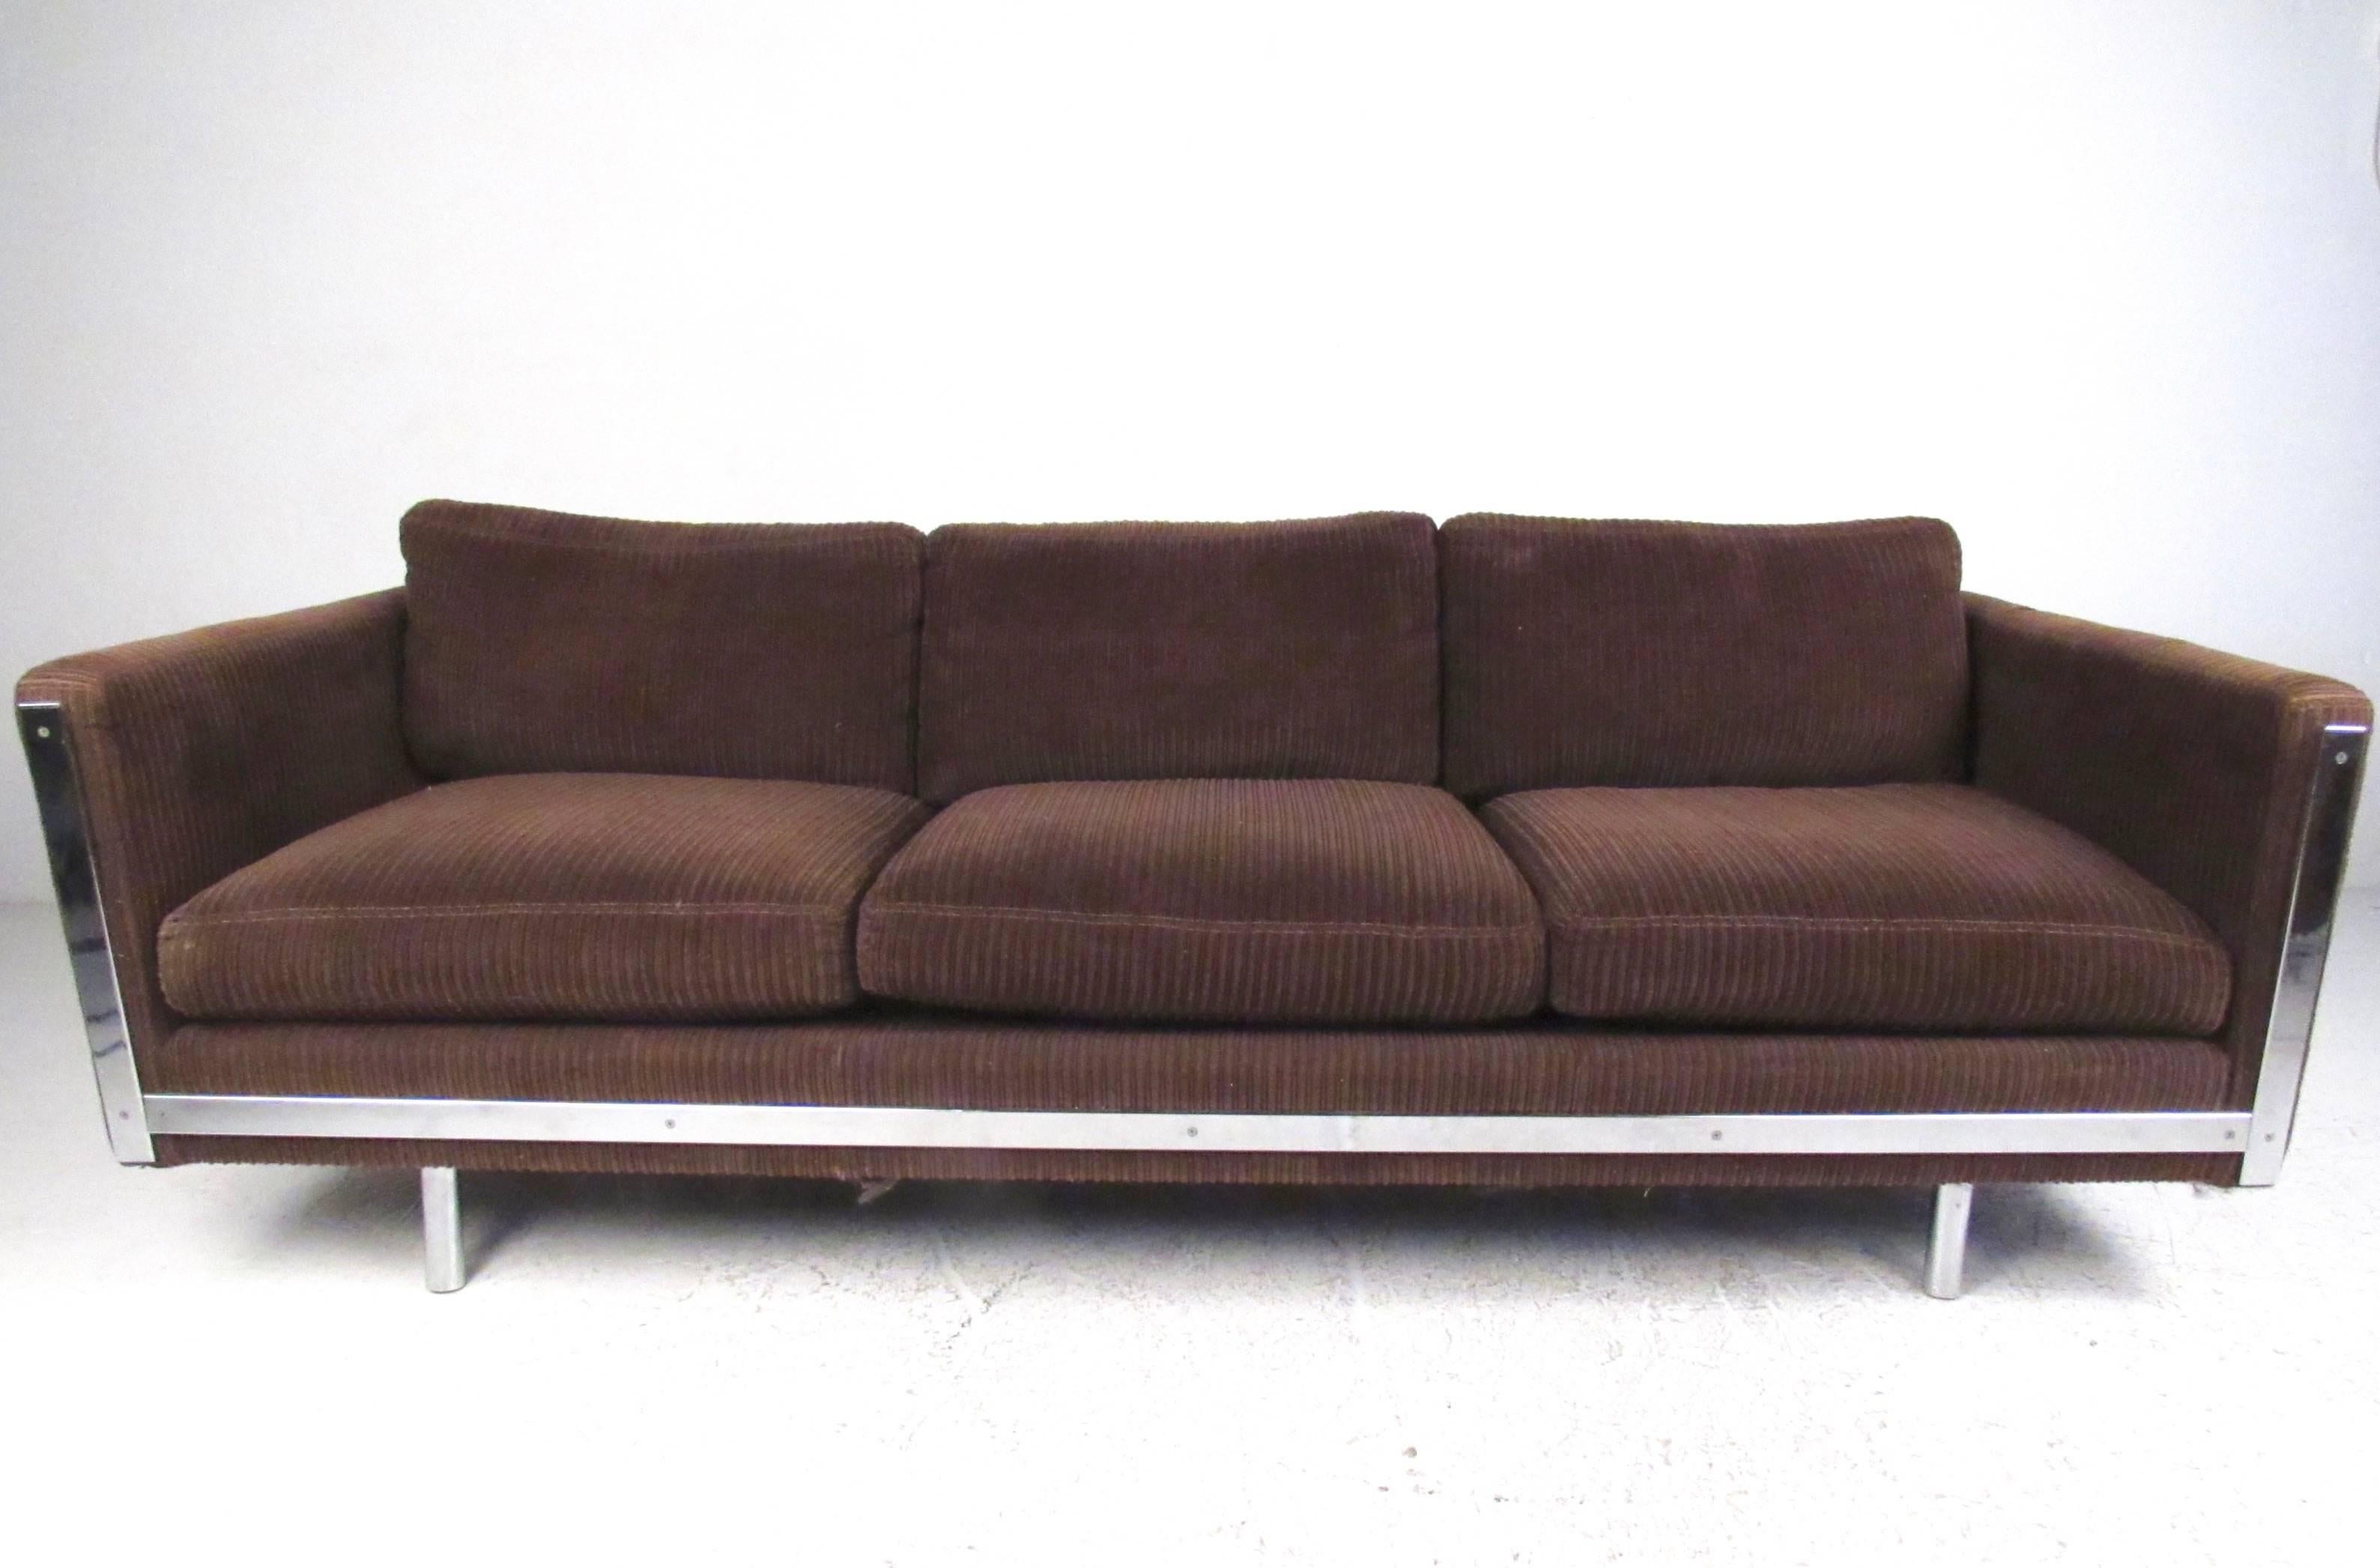 This unique modern three-seat sofa features brown upholstery, comfortable seating, and stylish chrome details. Impressive sofa seating for home or business, please confirm item location (NY or NJ).